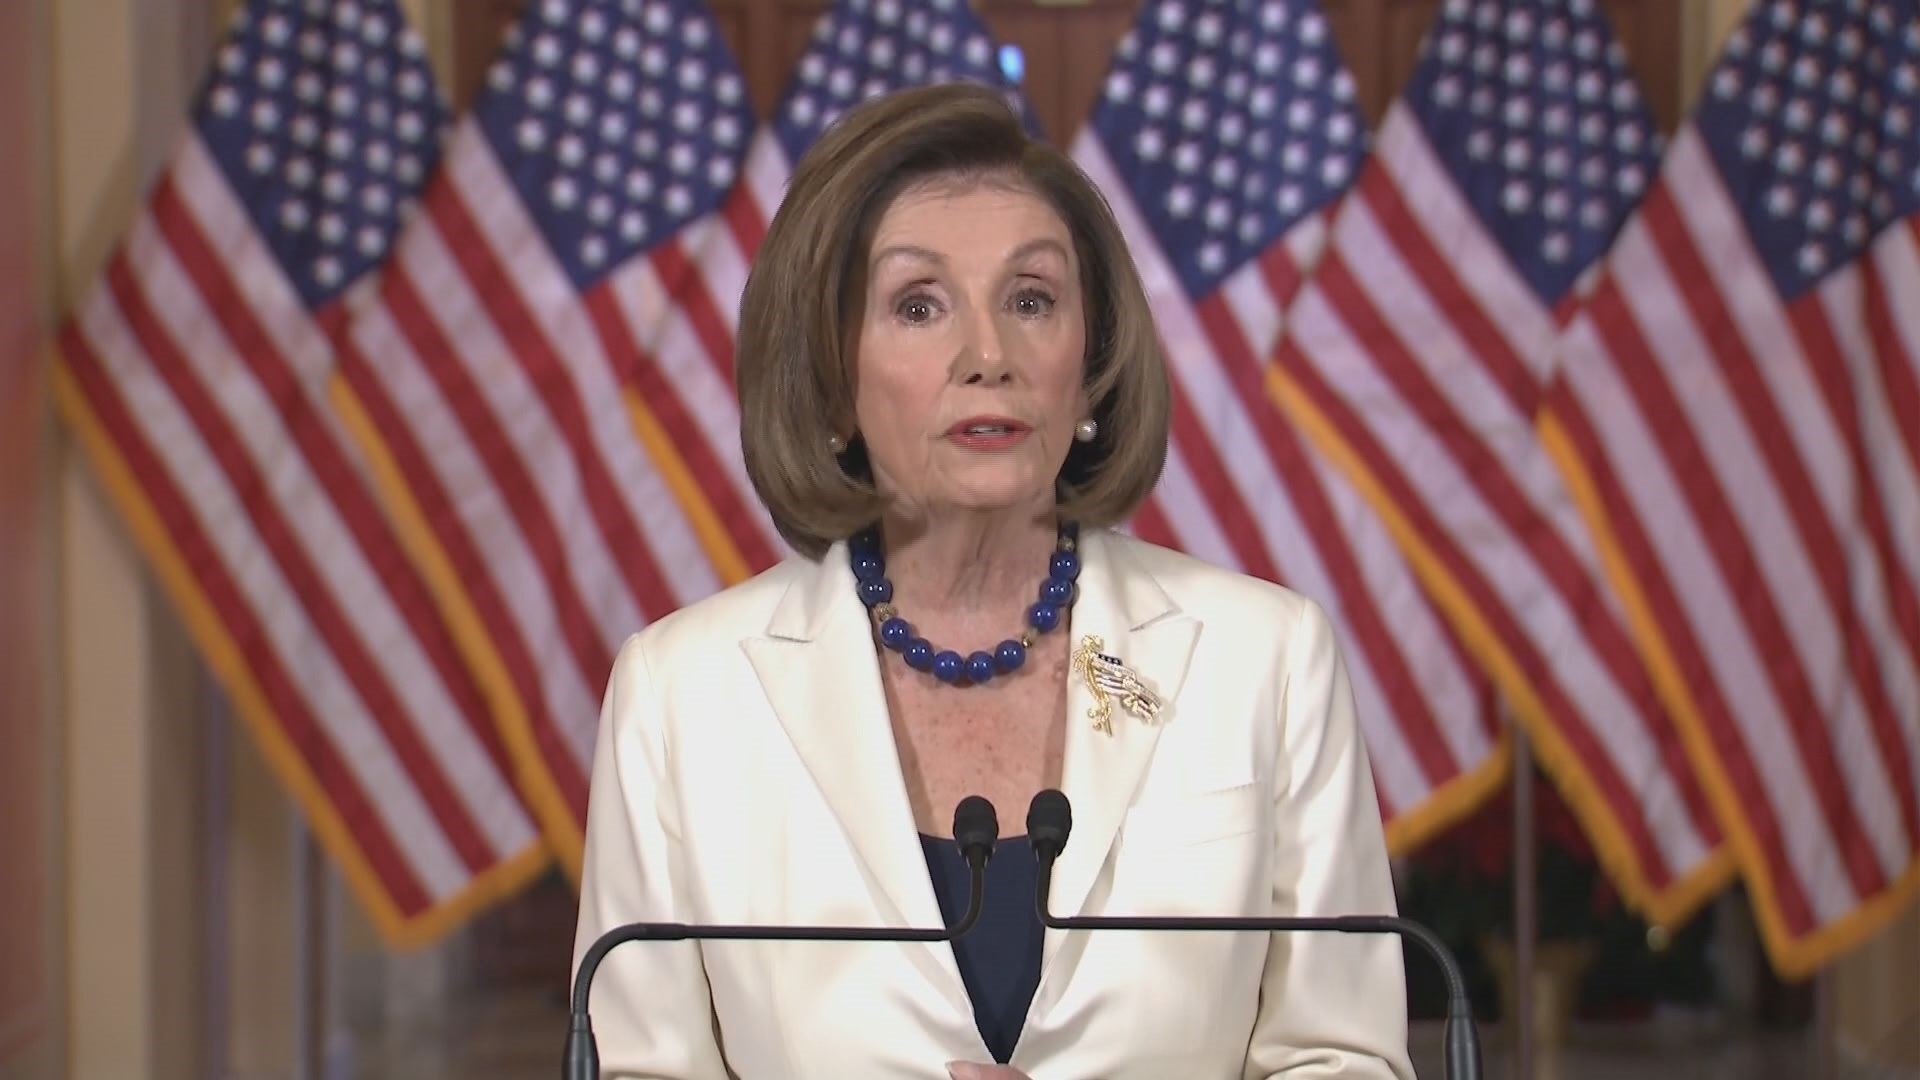 House Speaker Nancy Pelosi announced that the House is moving forward to draft articles of impeachment against President Donald Trump.